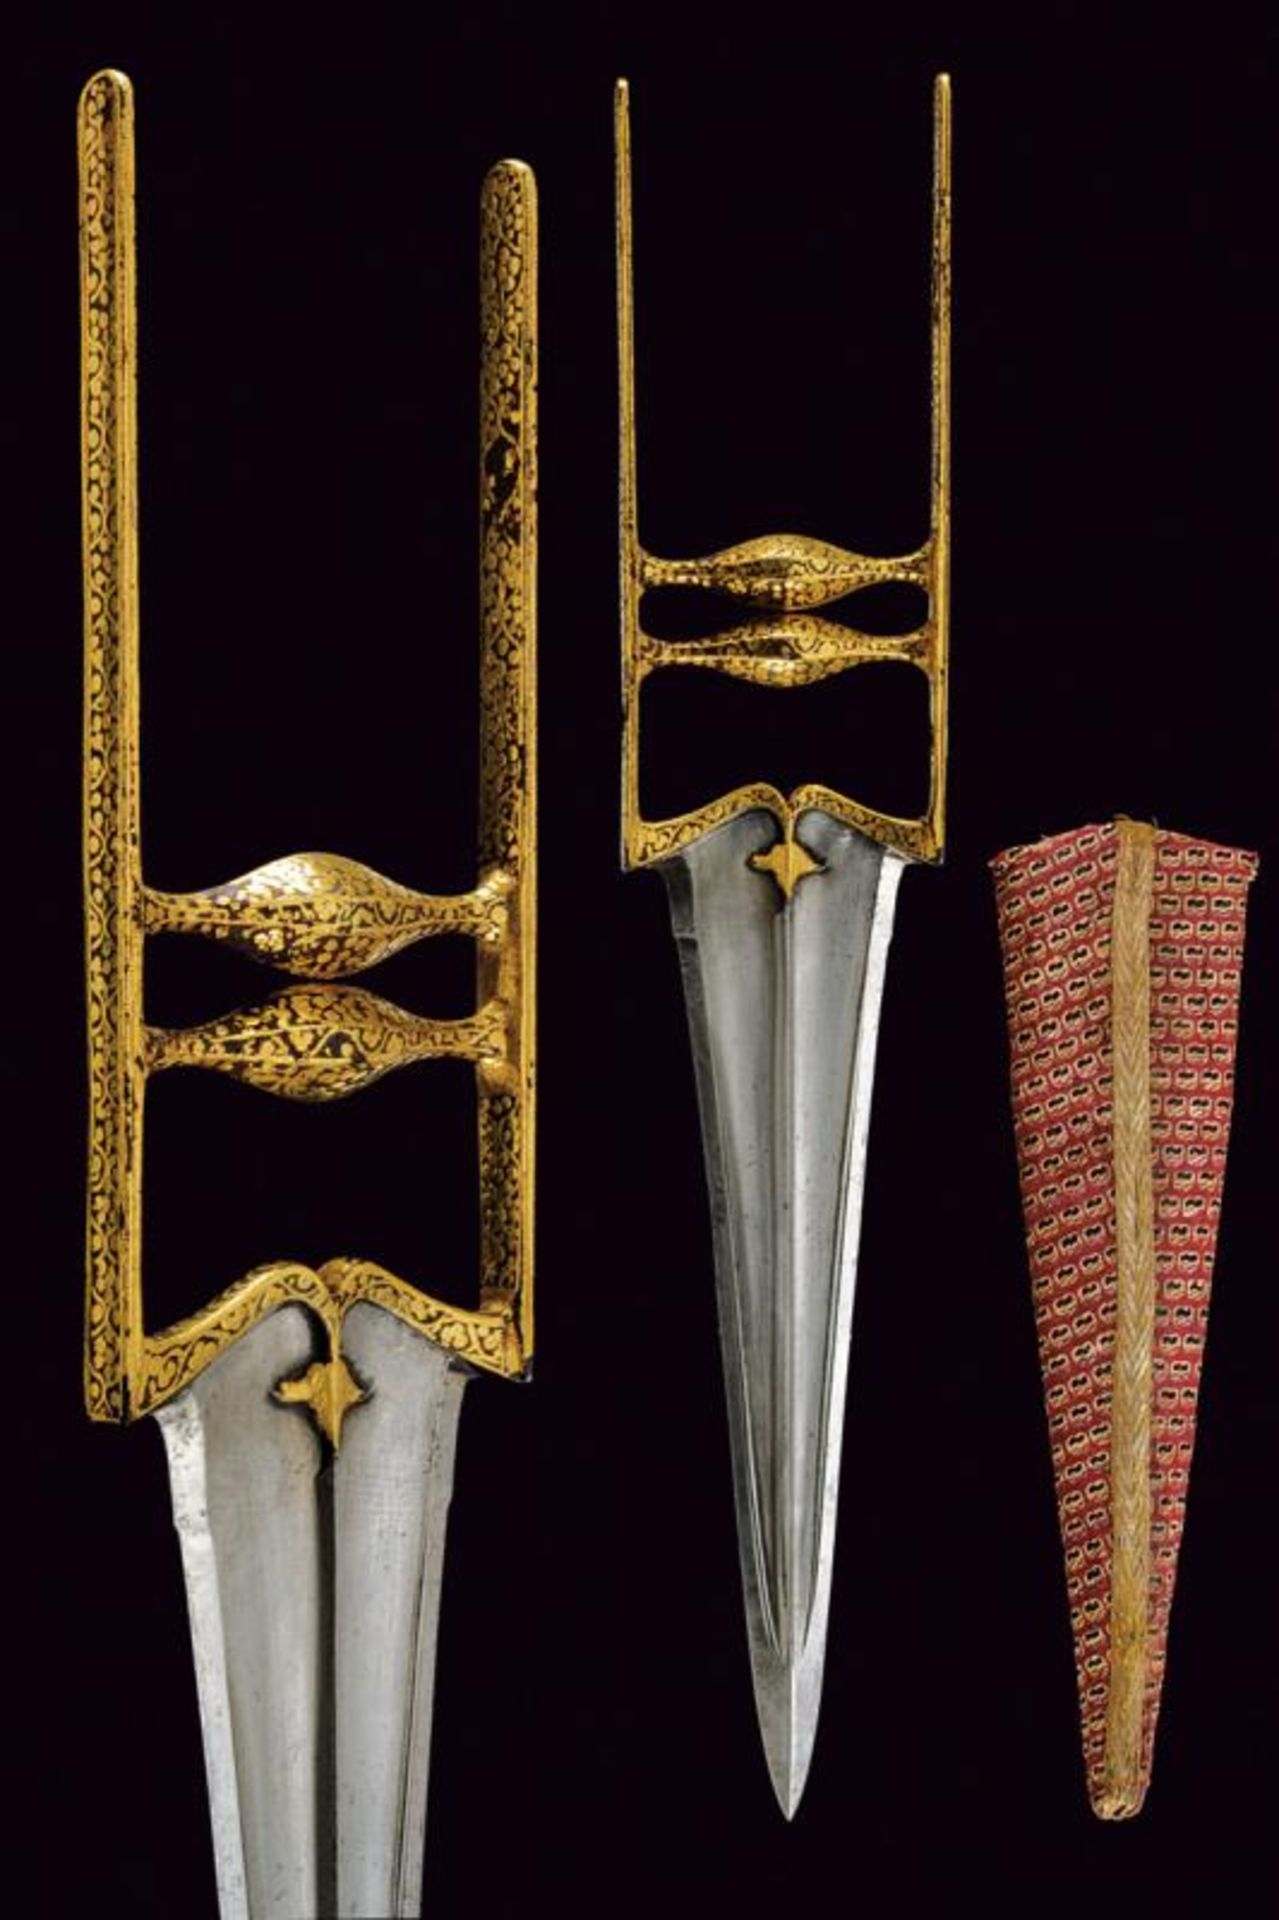 A katar with gilded mounts